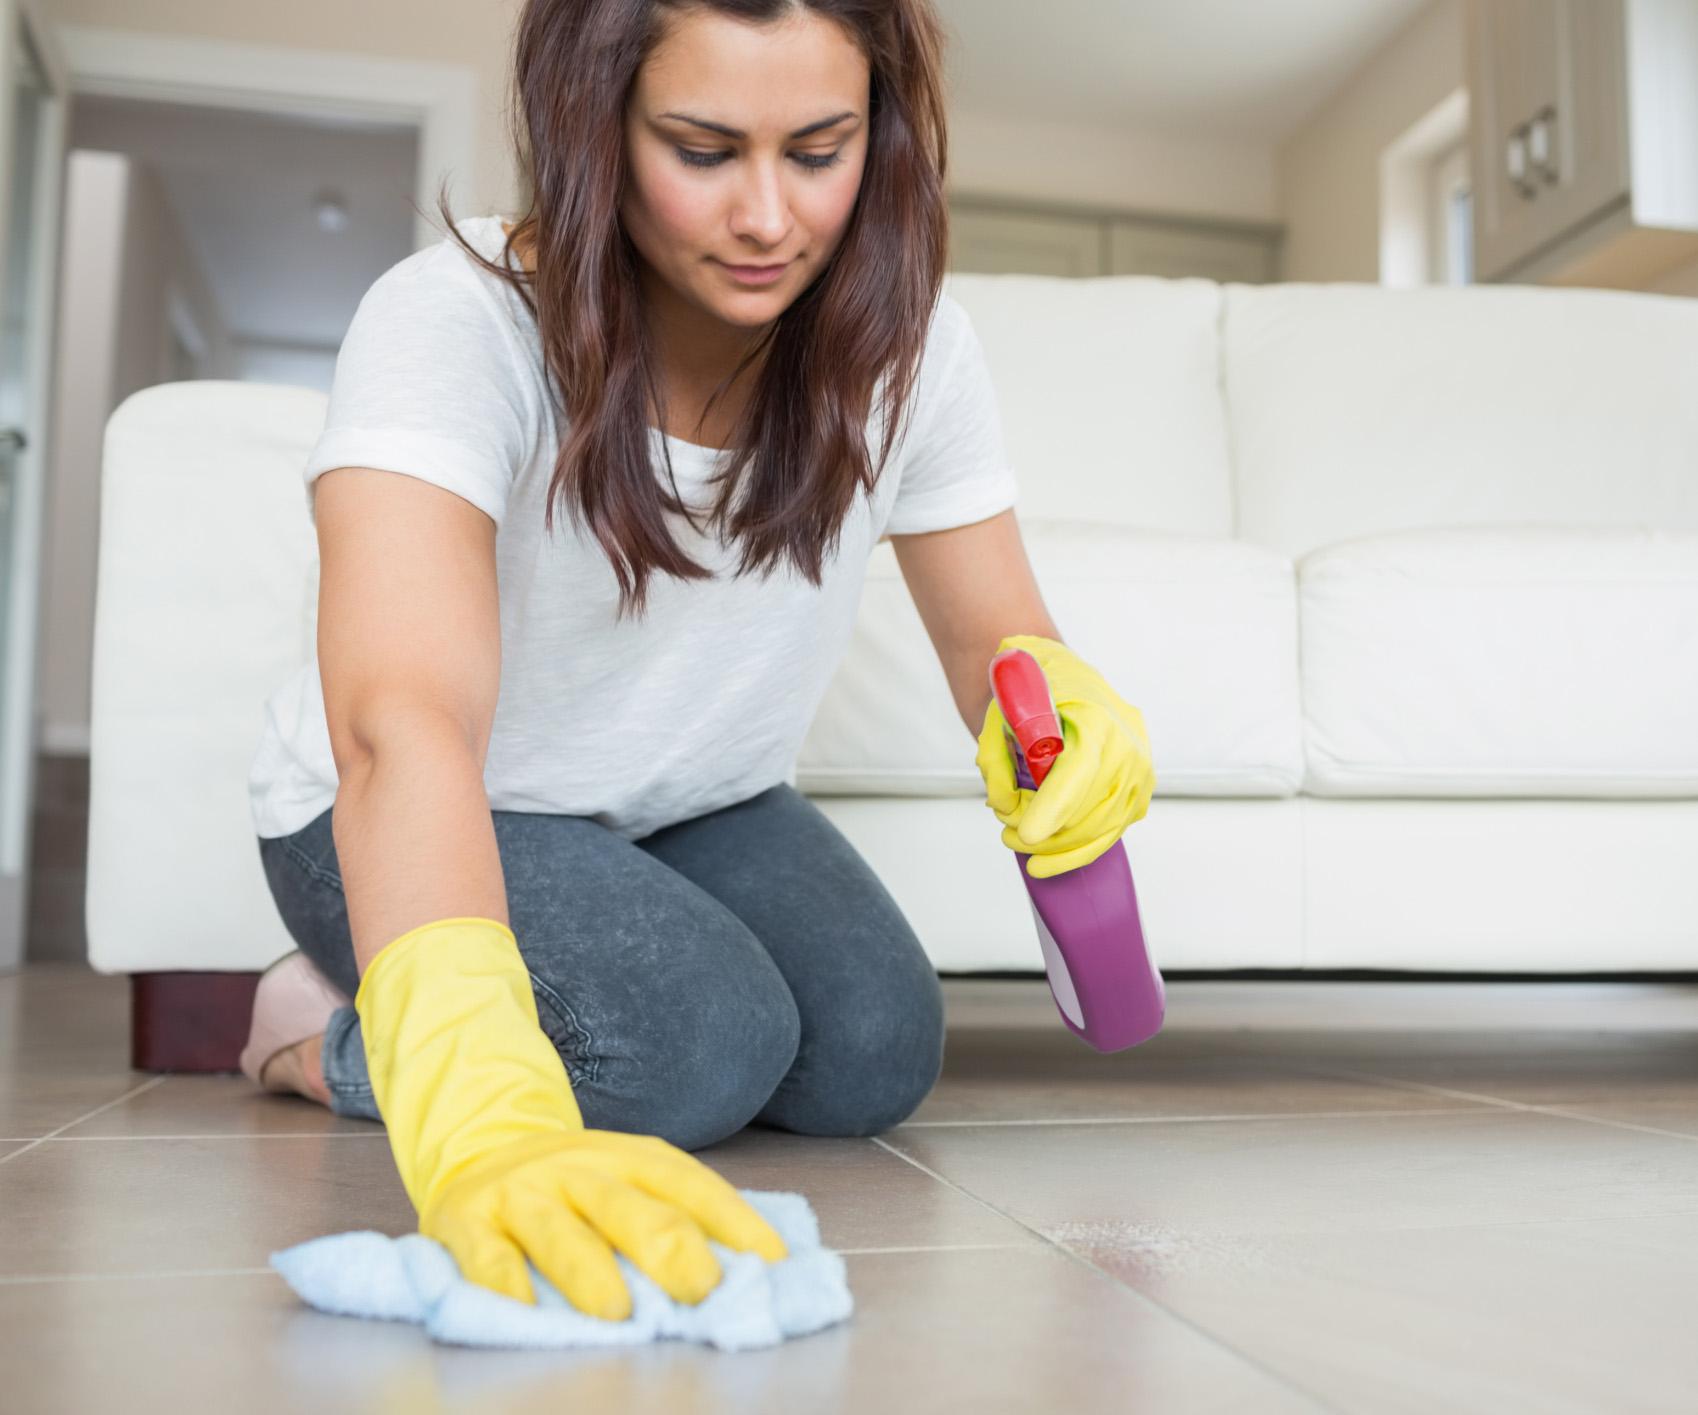 Are household chores making you ill?